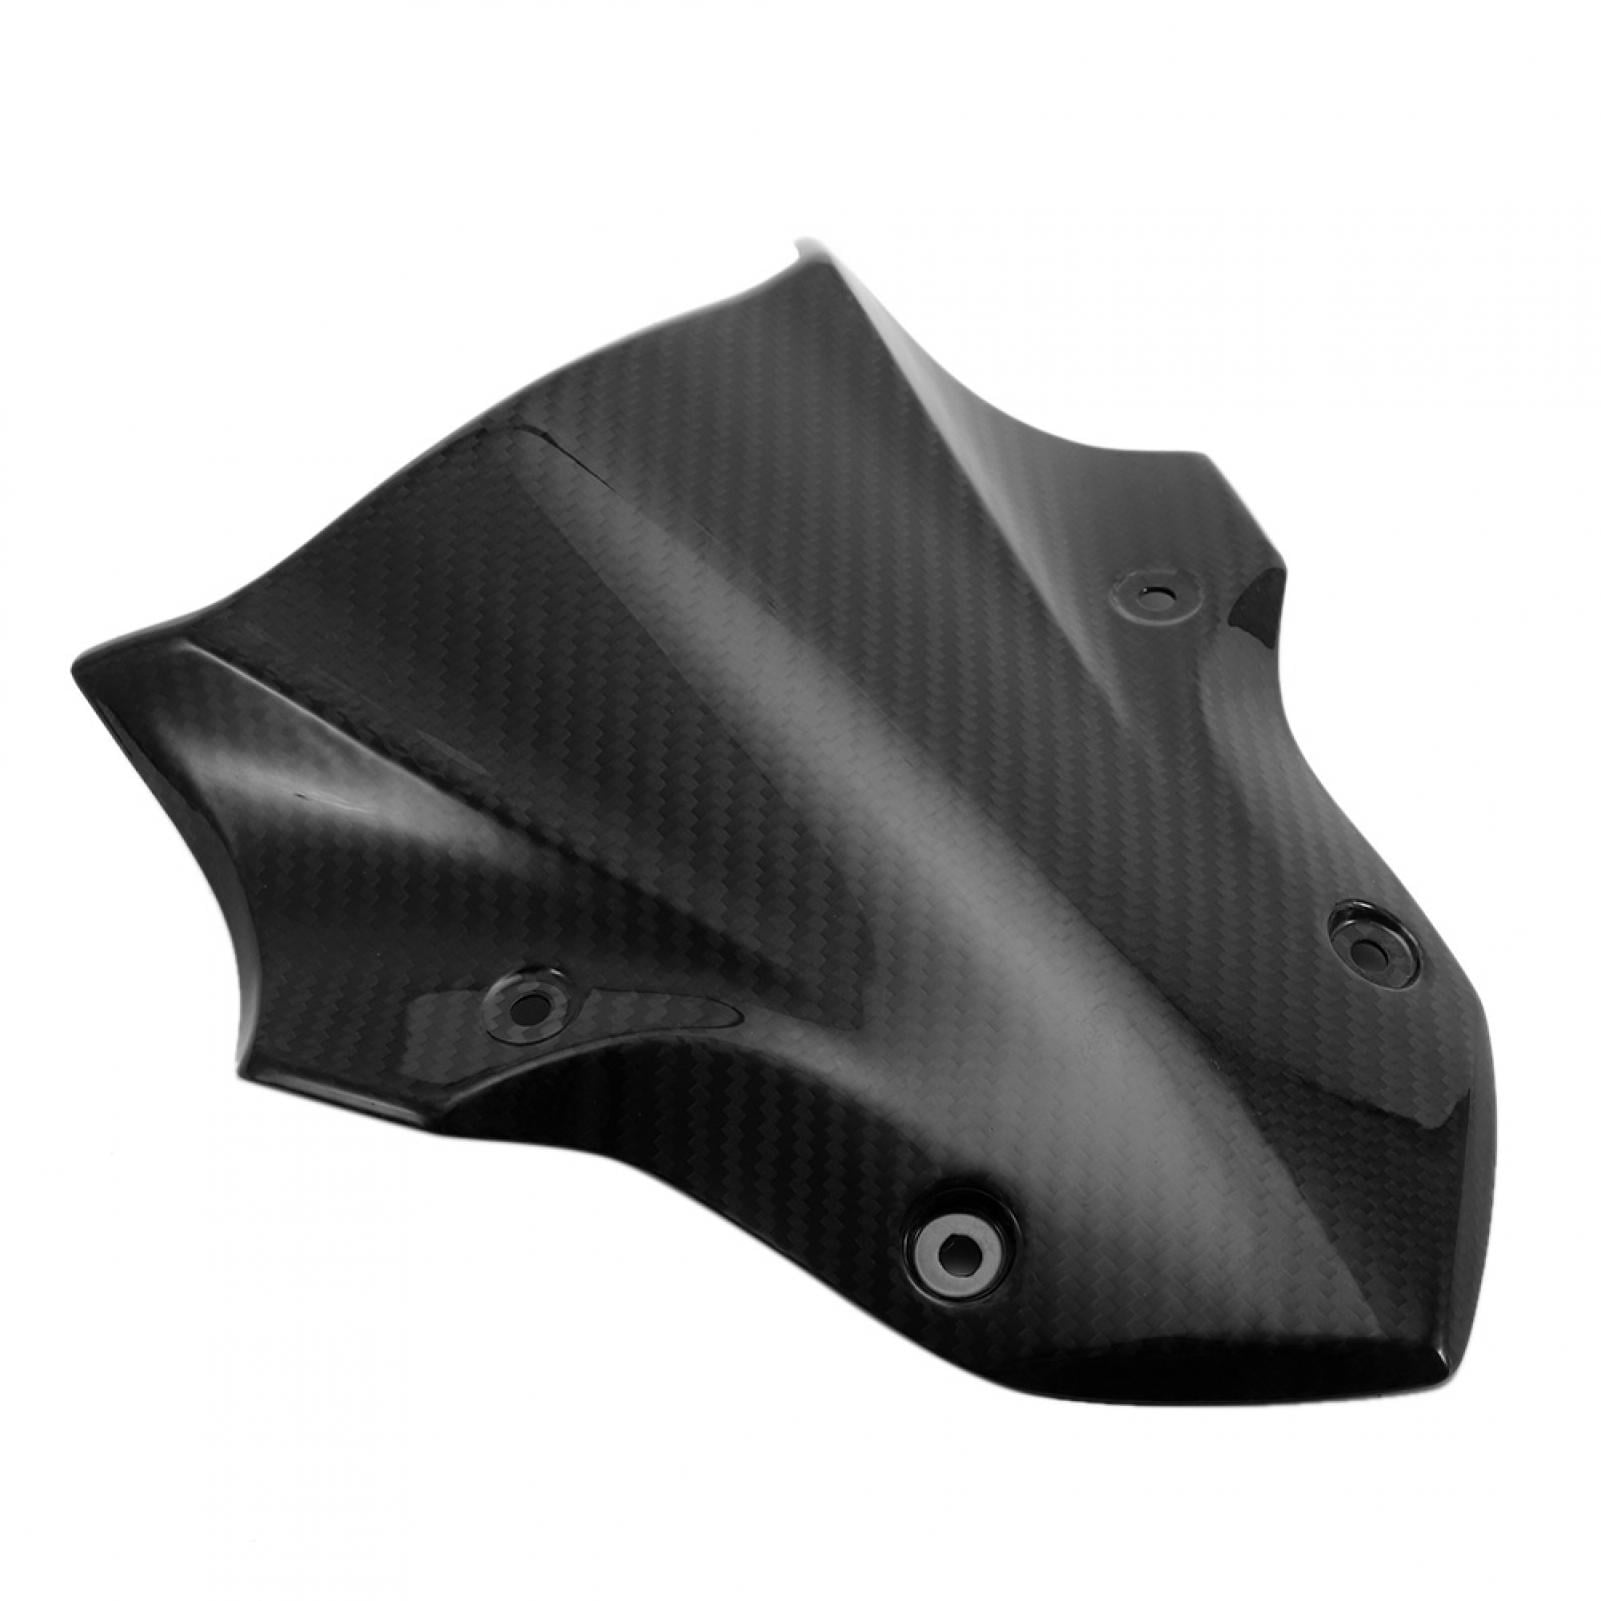 Carbon Fiber Windscreen Shield Cowl Fairings Cover Motorcycle Conversion for Z900 2017+ Qiilu Motorcycles Windshield Motorcycles Windshield